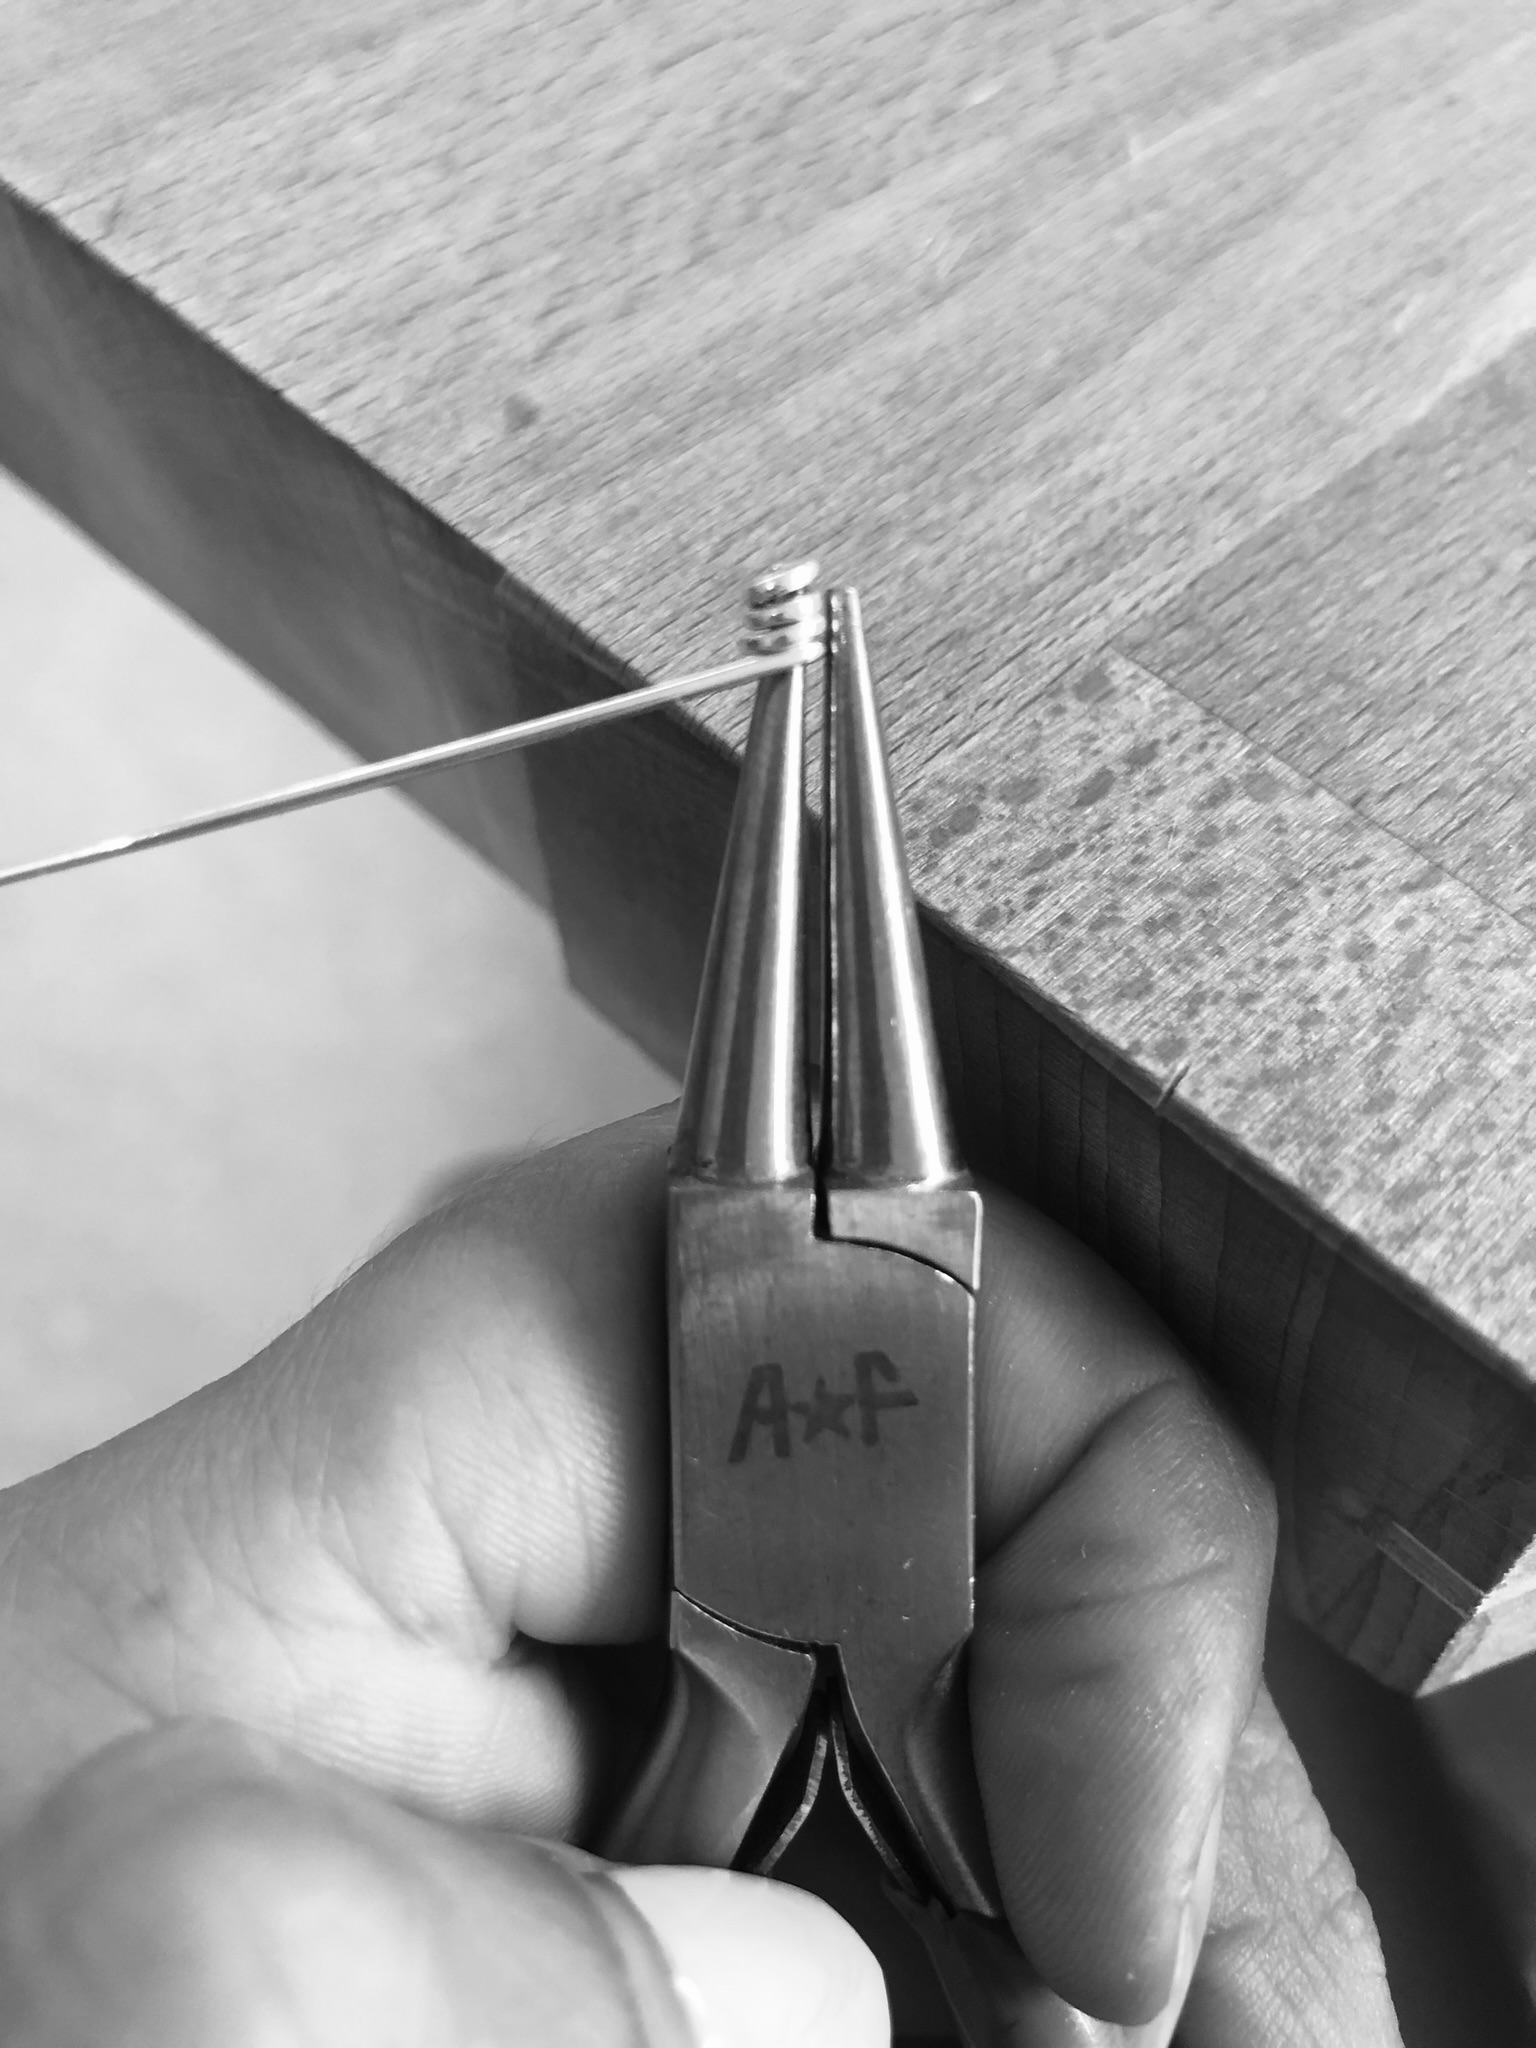 A pliers with a silverwire